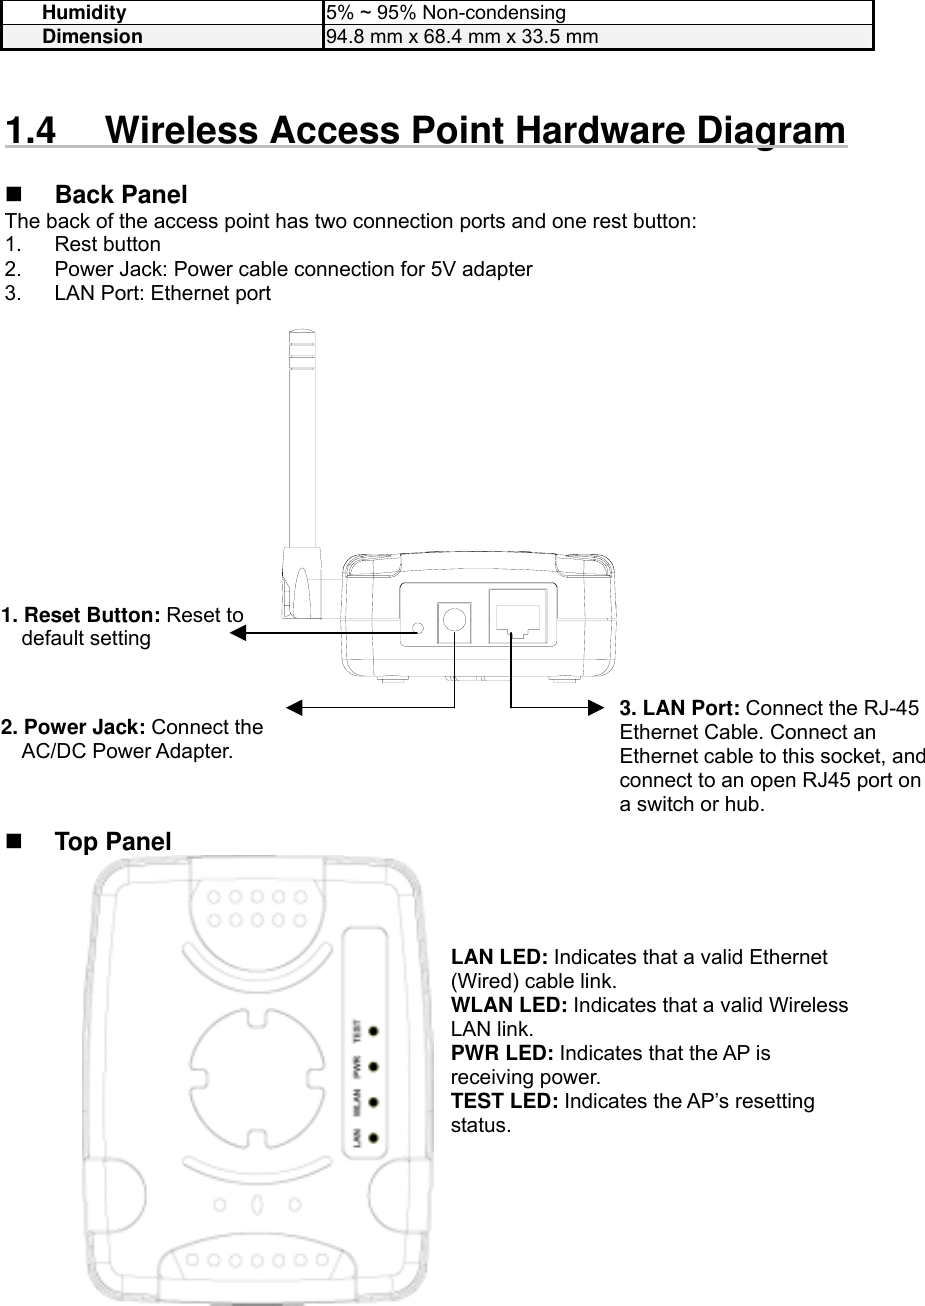 Humidity  5% ~ 95% Non-condensing Dimension 94.8 mm x 68.4 mm x 33.5 mm   1.4  Wireless Access Point Hardware Diagram    Back Panel The back of the access point has two connection ports and one rest button: 1. Rest button 2.  Power Jack: Power cable connection for 5V adapter 3.  LAN Port: Ethernet port      2. Power Jack: Connect the AC/DC Power Adapter. 1. Reset Button: Reset to default setting 3. LAN Port: Connect the RJ-45 Ethernet Cable. Connect an Ethernet cable to this socket, andconnect to an open RJ45 port on a switch or hub.       Top Panel   LAN LED: Indicates that a valid Ethernet (Wired) cable link. WLAN LED: Indicates that a valid Wireless LAN link. PWR LED: Indicates that the AP is receiving power. TEST LED: Indicates the AP’s resetting status.  